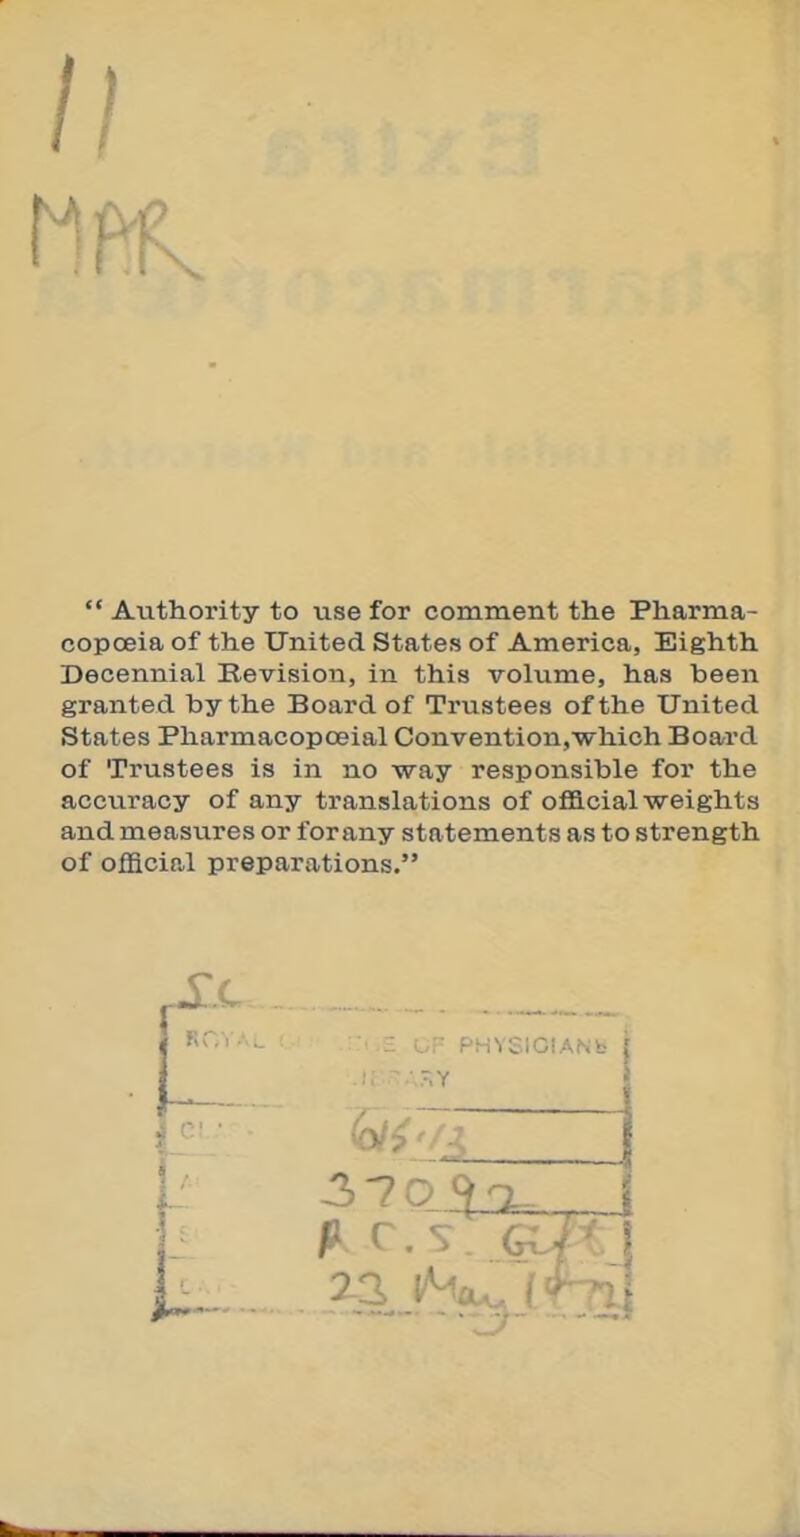  Authority to use for comment the Pharma- copoeia of the United States of America, Eighth Decennial Revision, in this volume, has been granted by the Board of Trustees of the United States Pharmacopceial Convention,which Board of Trustees is in no way responsible for the accuracy of any translations of official weights and measures or for any statements as to strength of official preparations, ■ ' PHYSICIANS C! 3 7 oko^^J 22 l/^cu. i